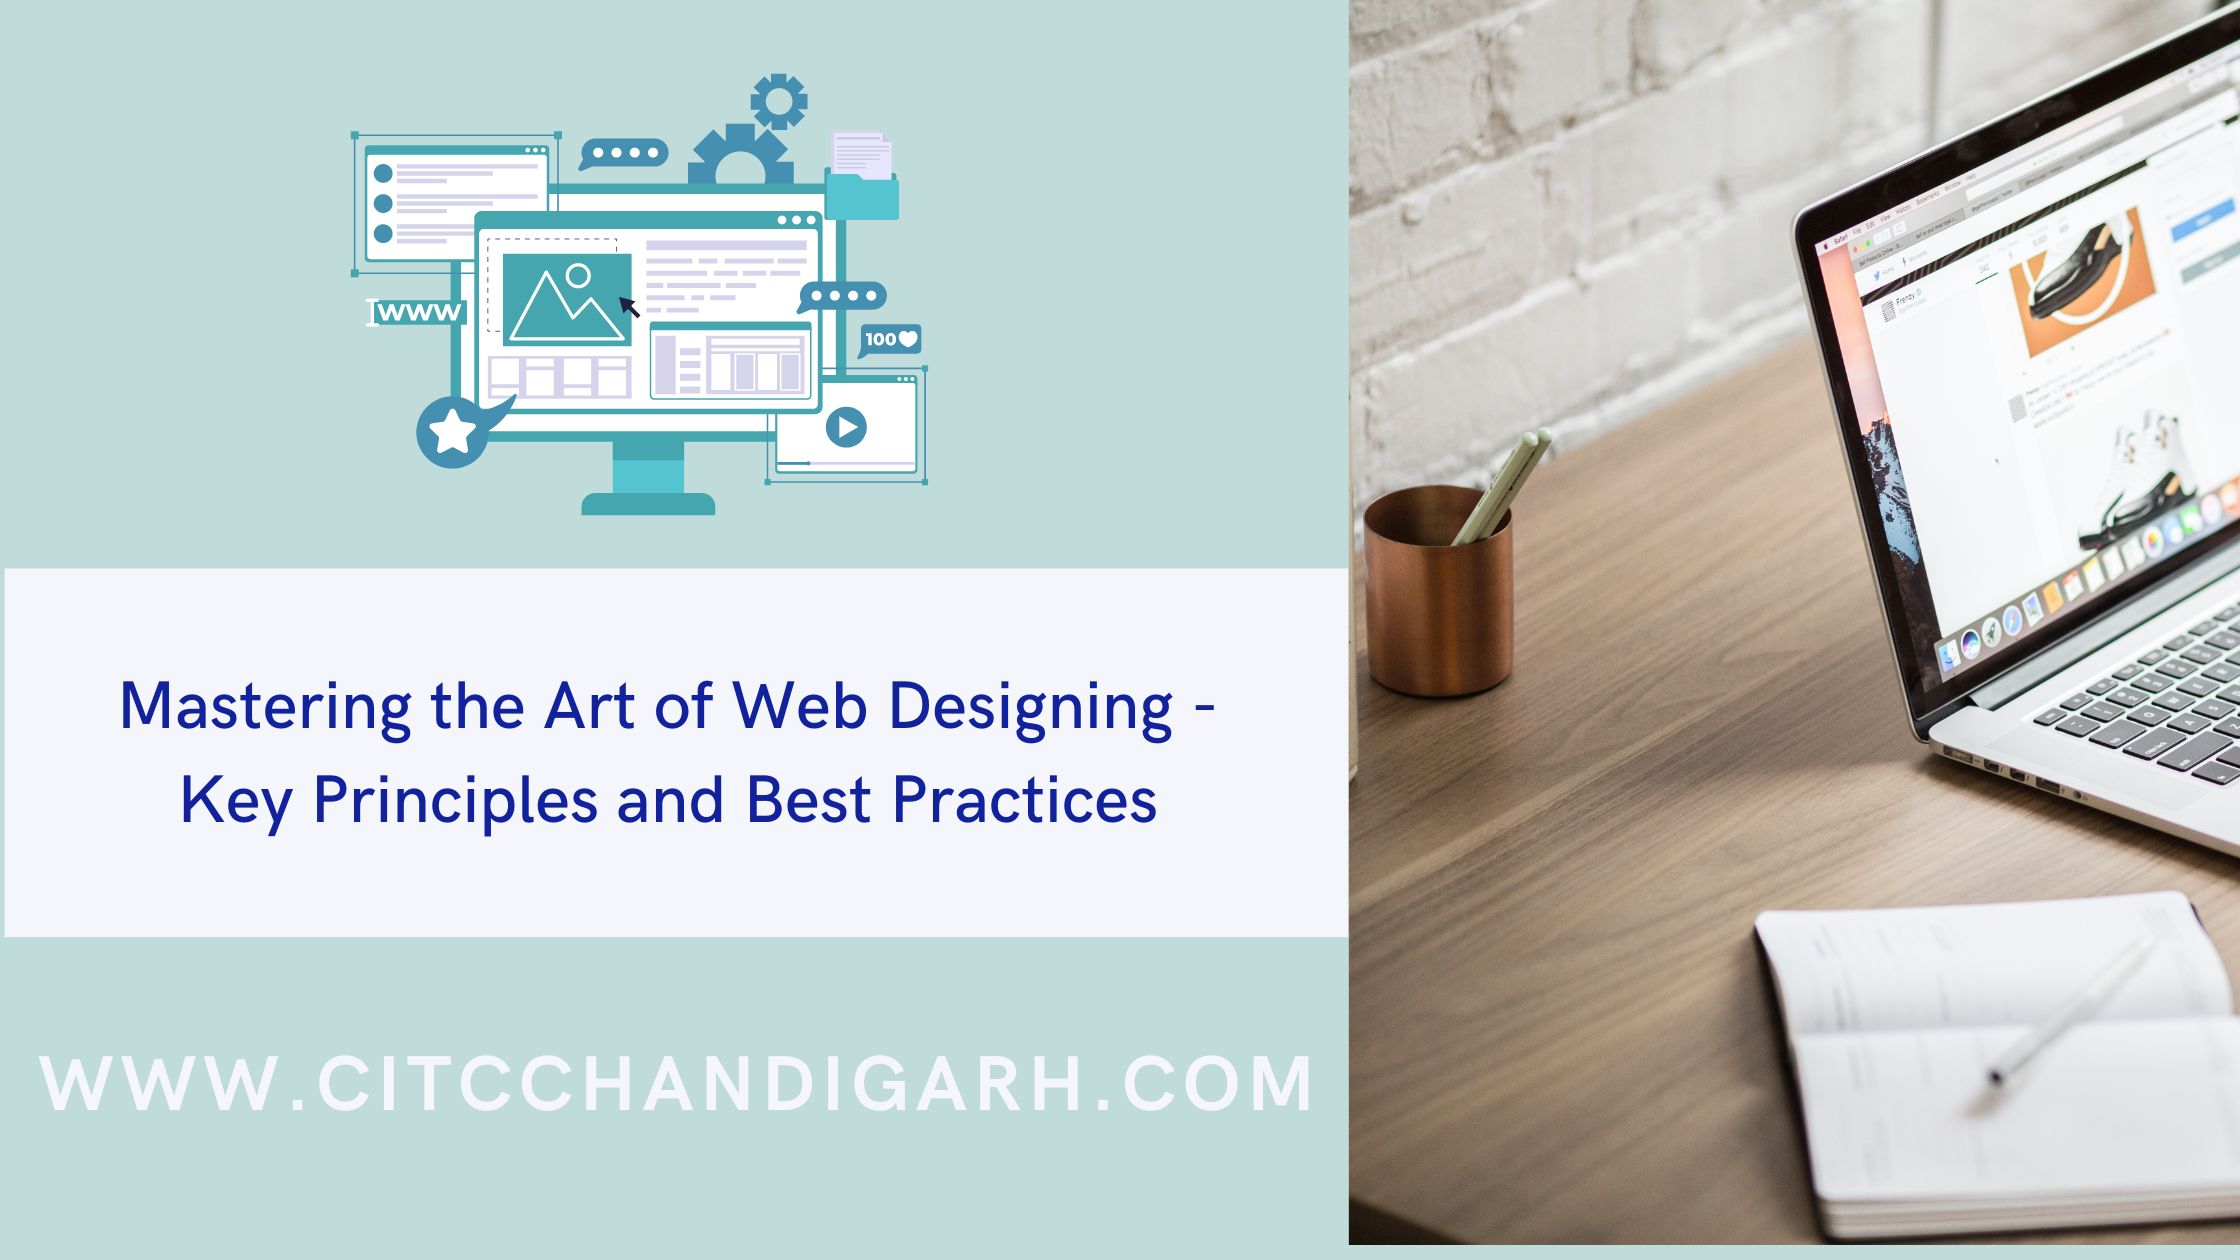 Mastering the Art of Web Designing - Key Principles and Best Practices